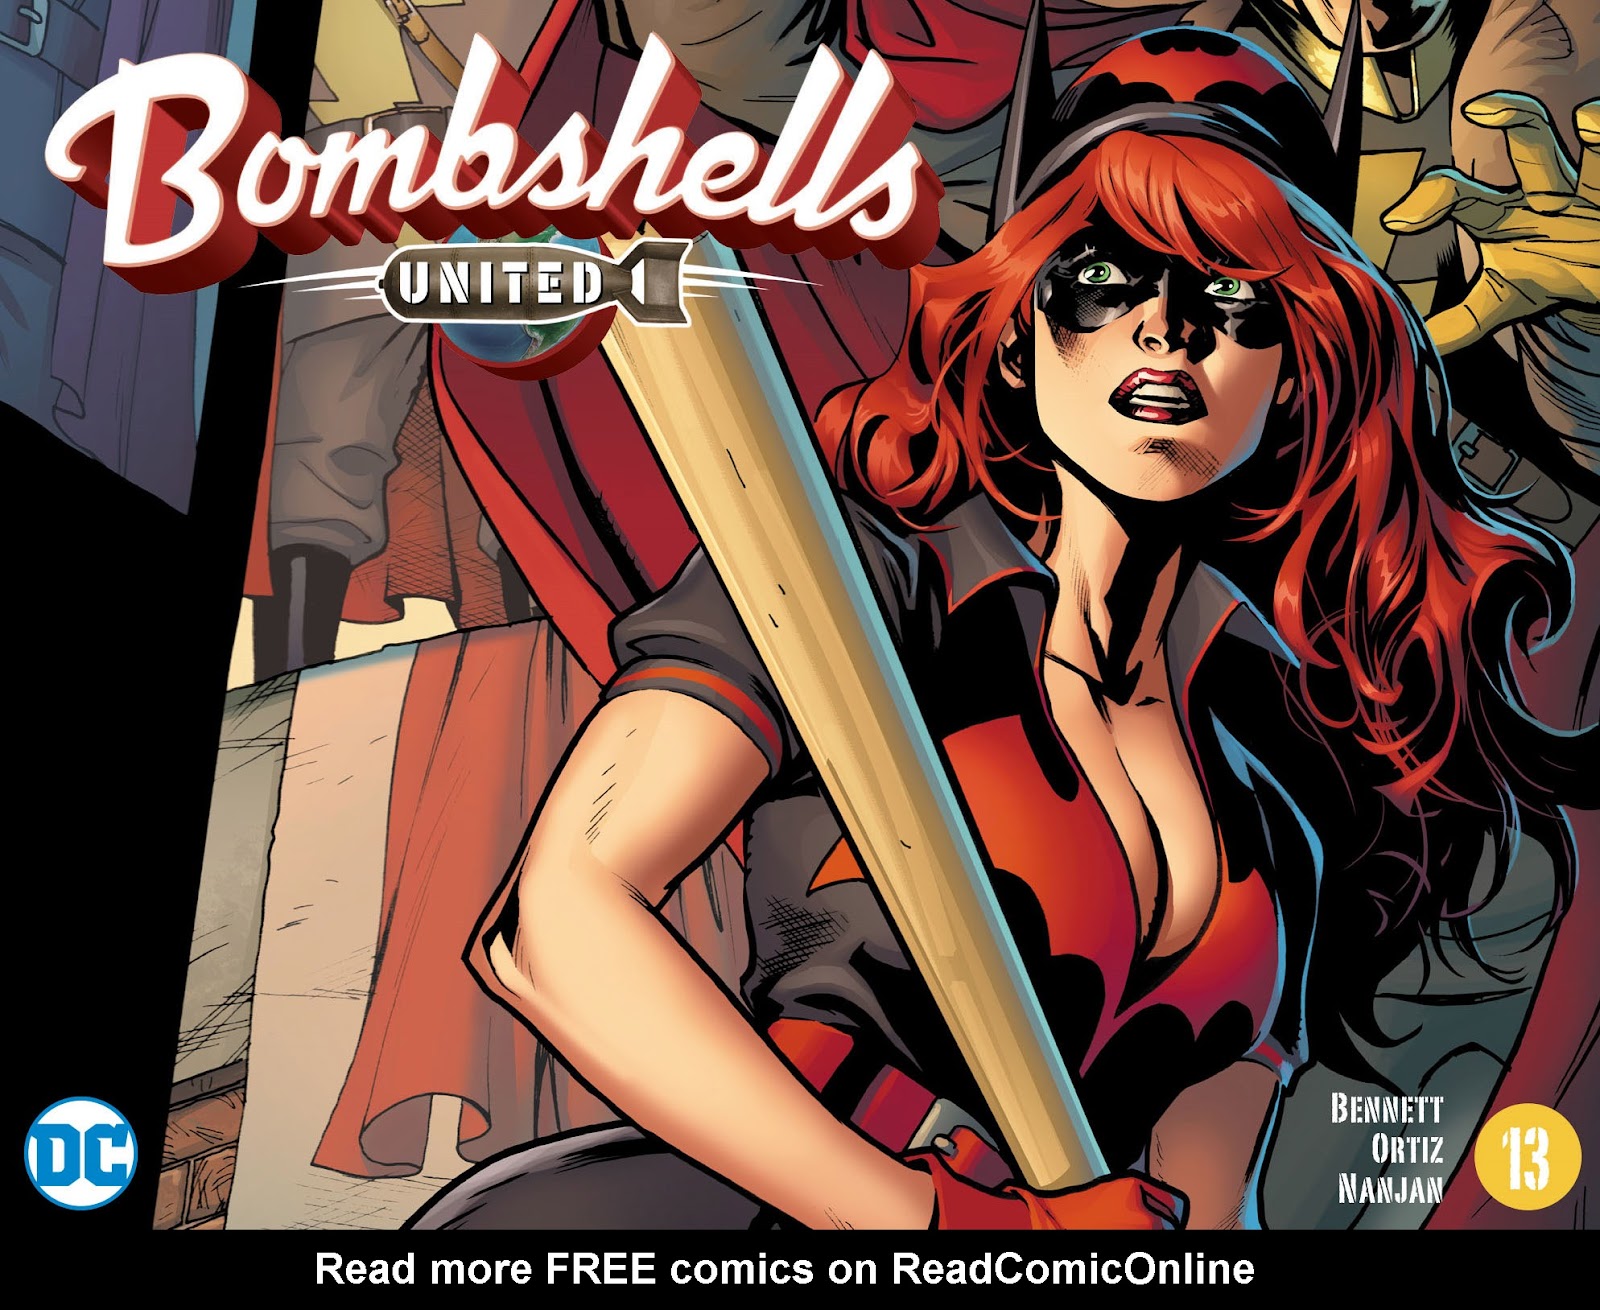 Read online Bombshells: United comic - Issue #13 - 1. Online read comic and...